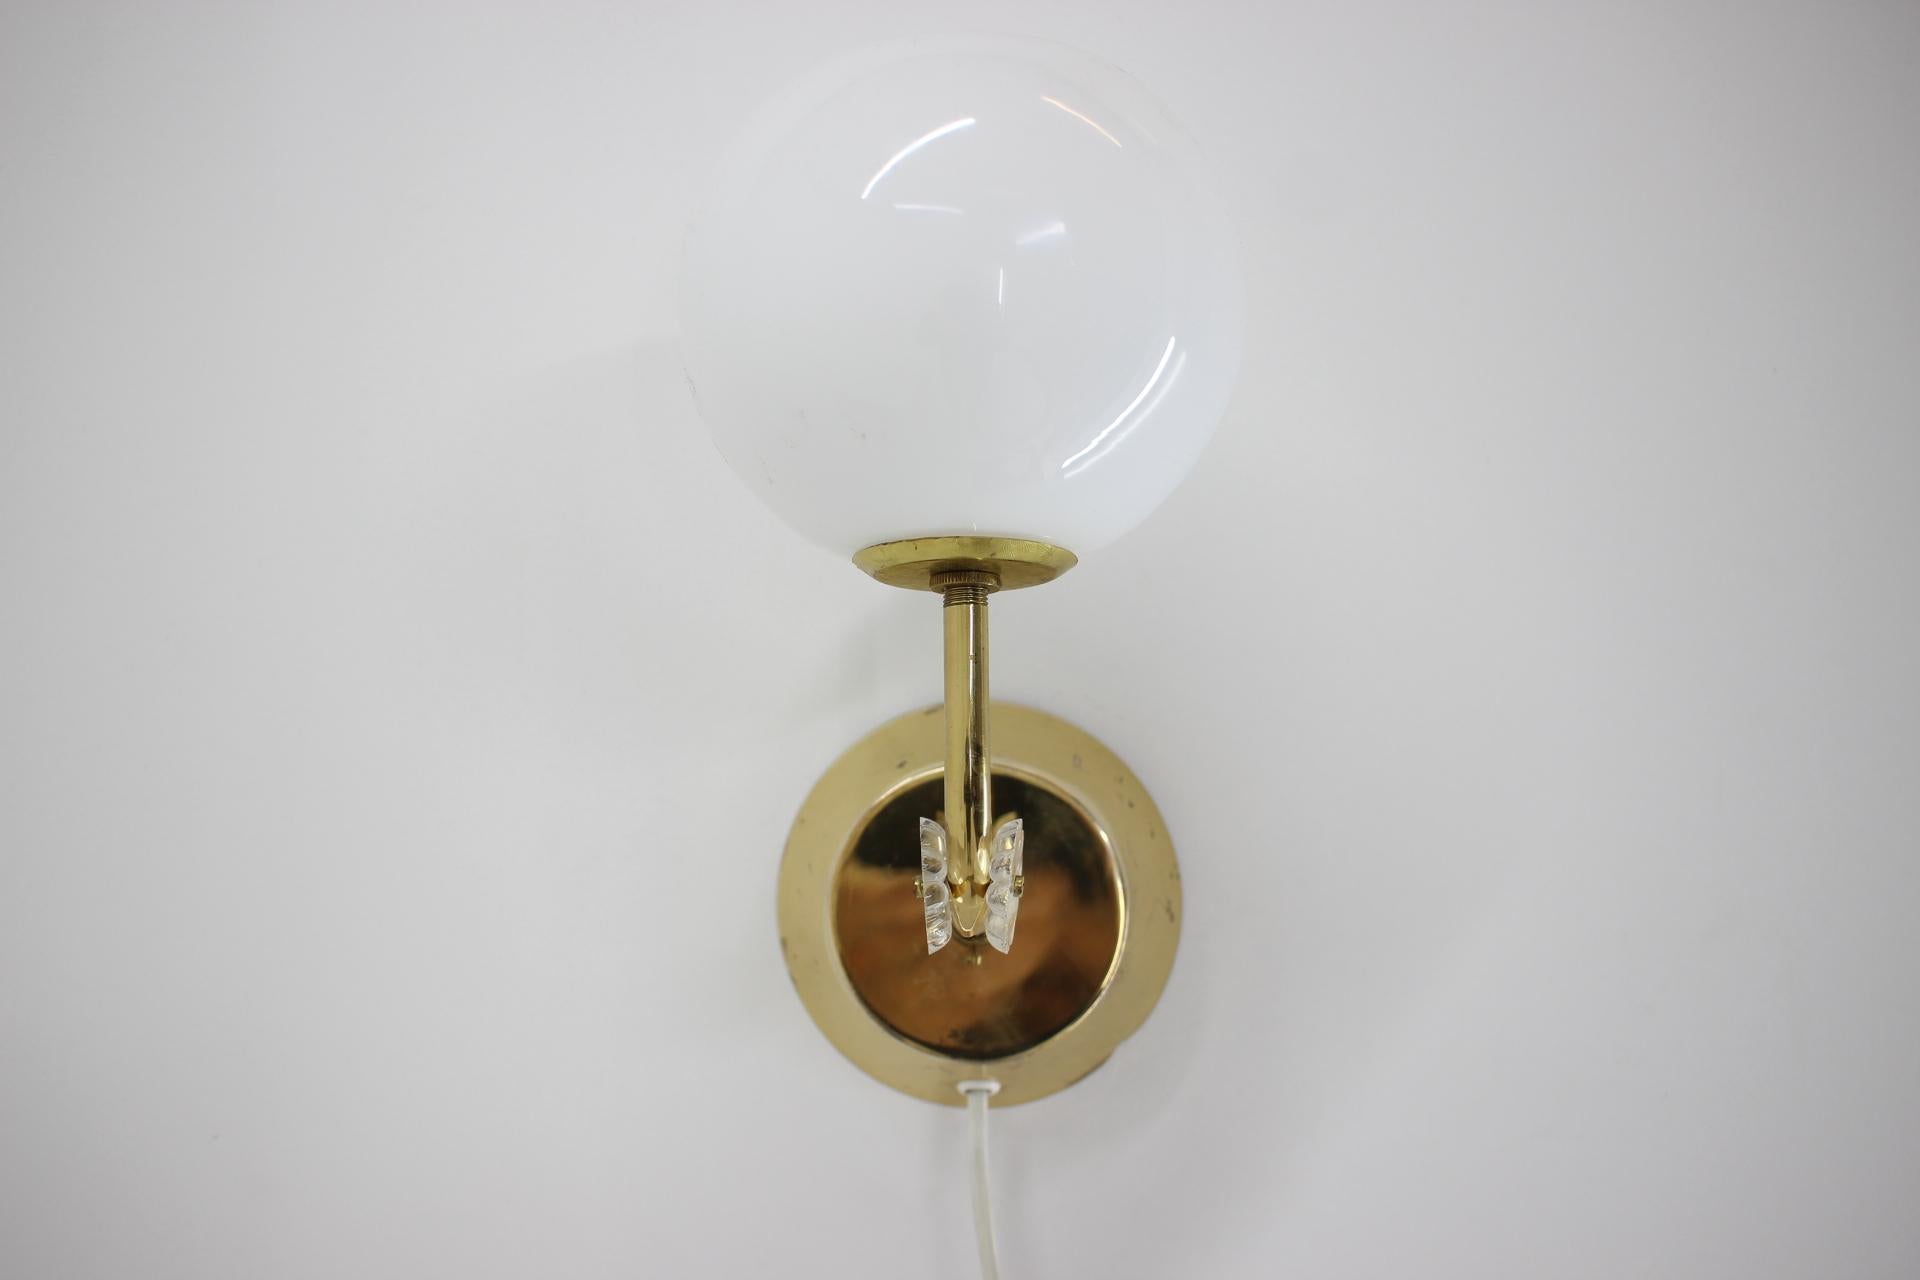 Czech Midcentury Design Wall Lamp, 1960s For Sale